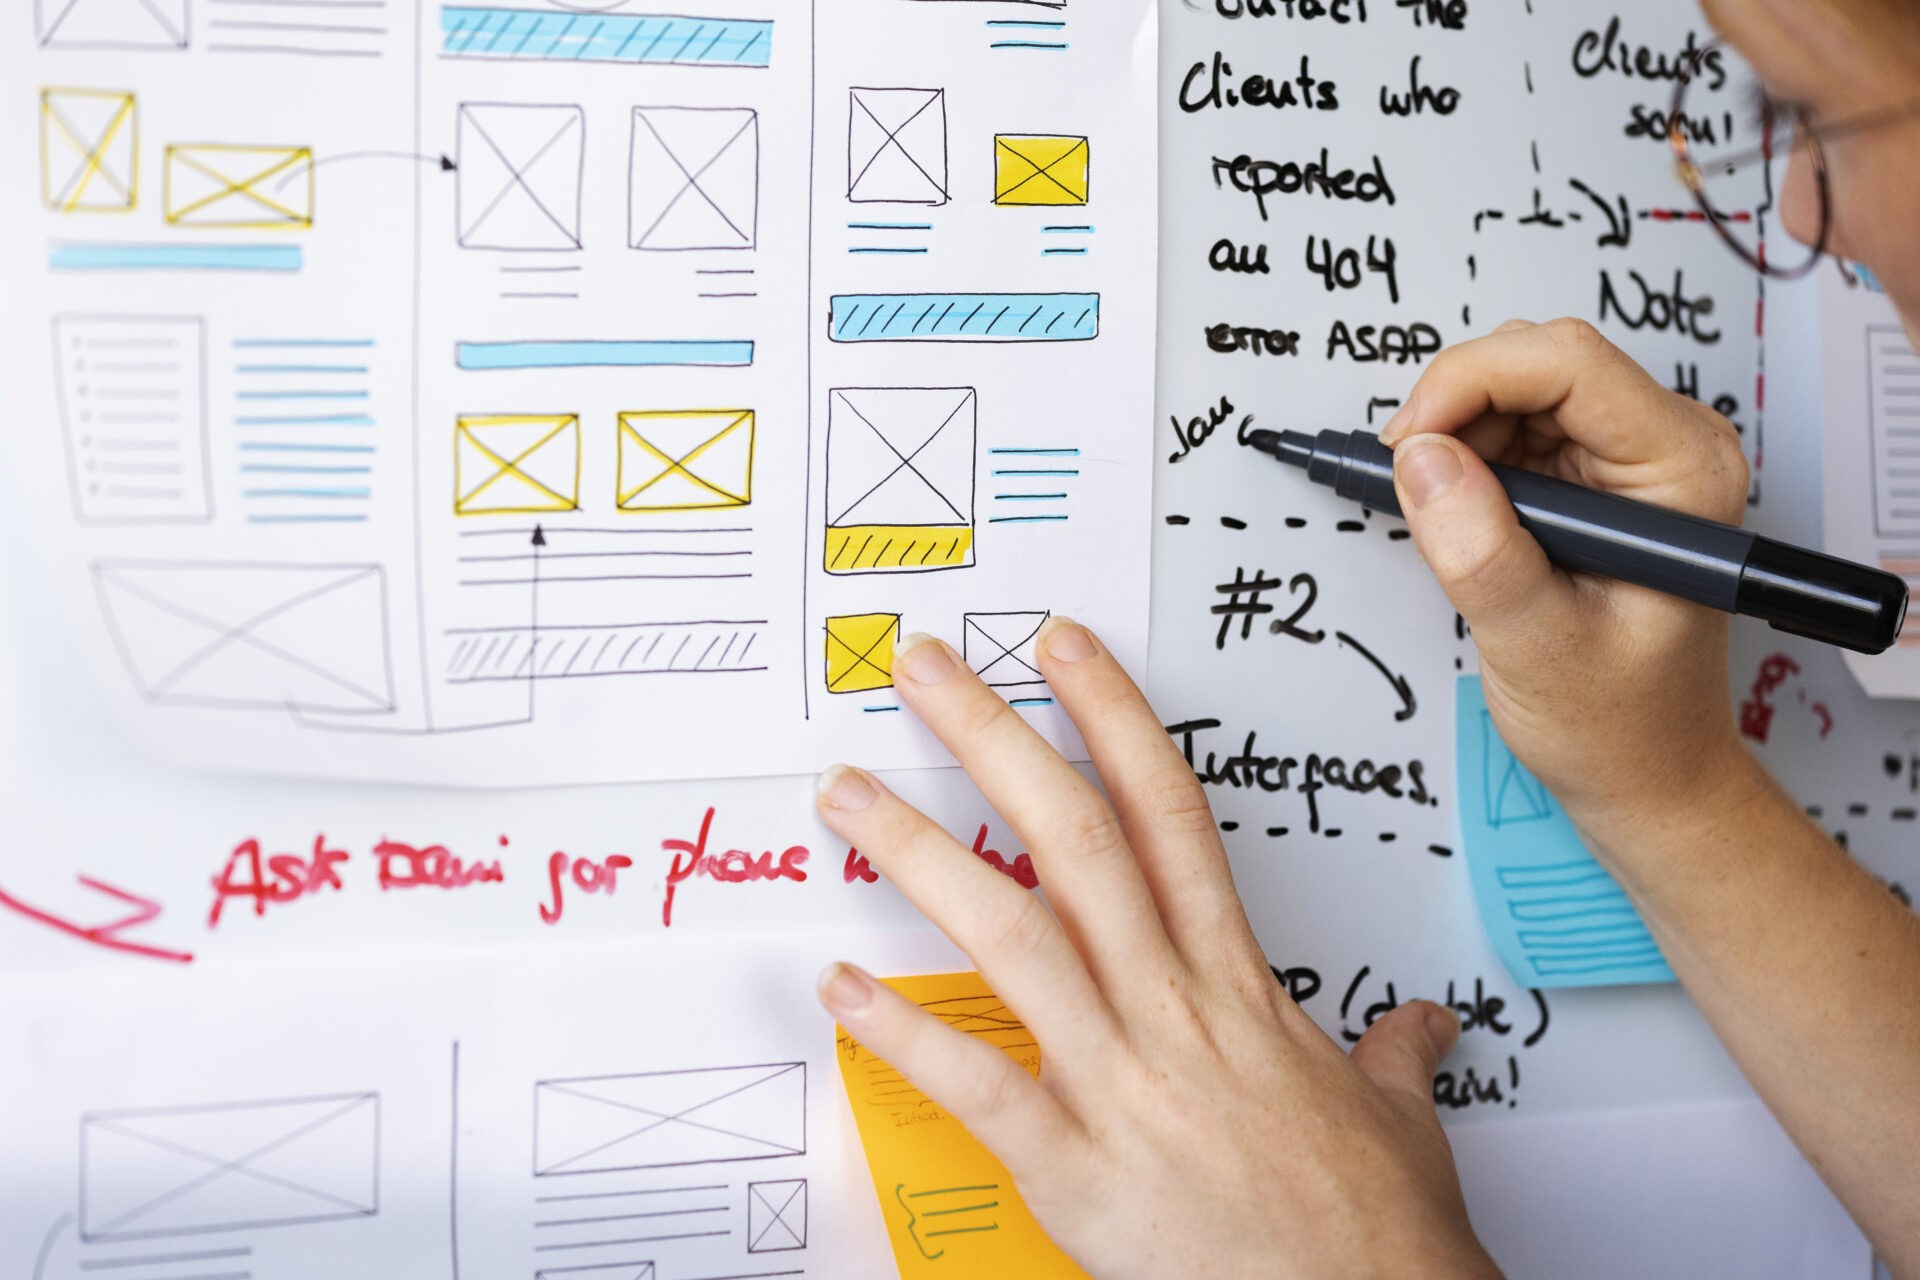 Female web designer is making notes with UX design mockups pinned to a wall.